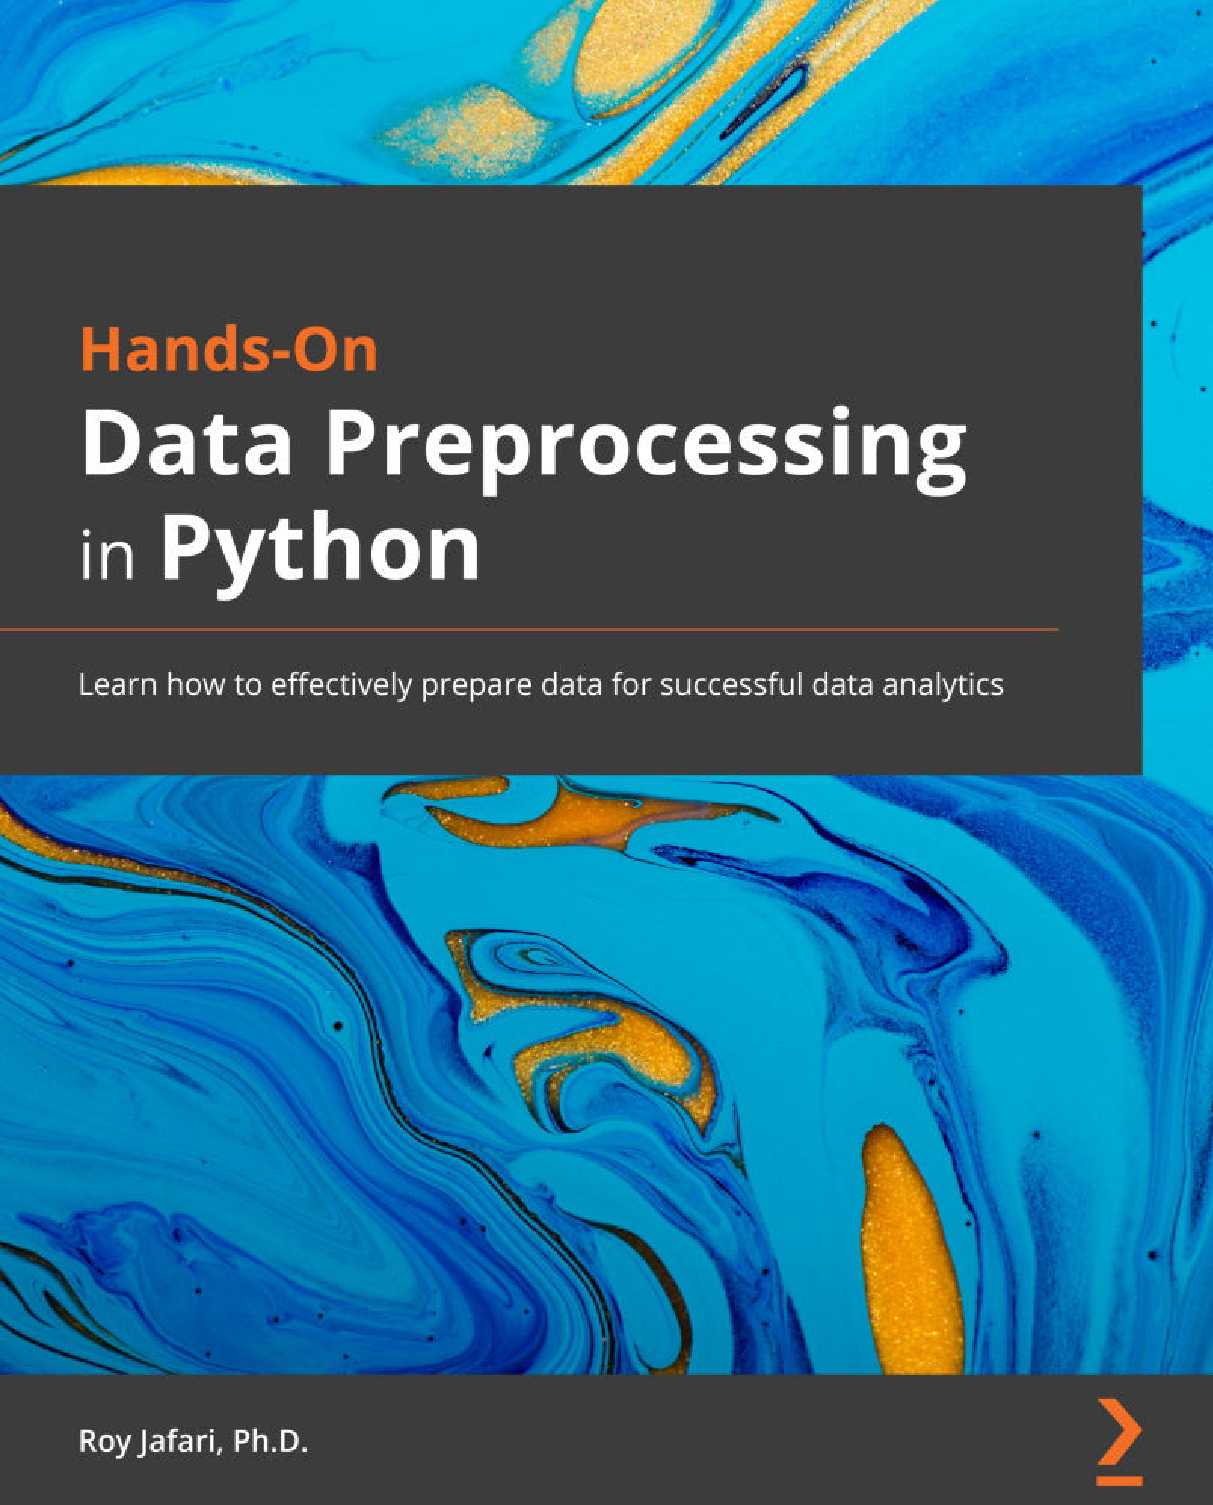 Hands-On Data Preprocessing in Python: Learn how to effectively prepare data for successful data analytics